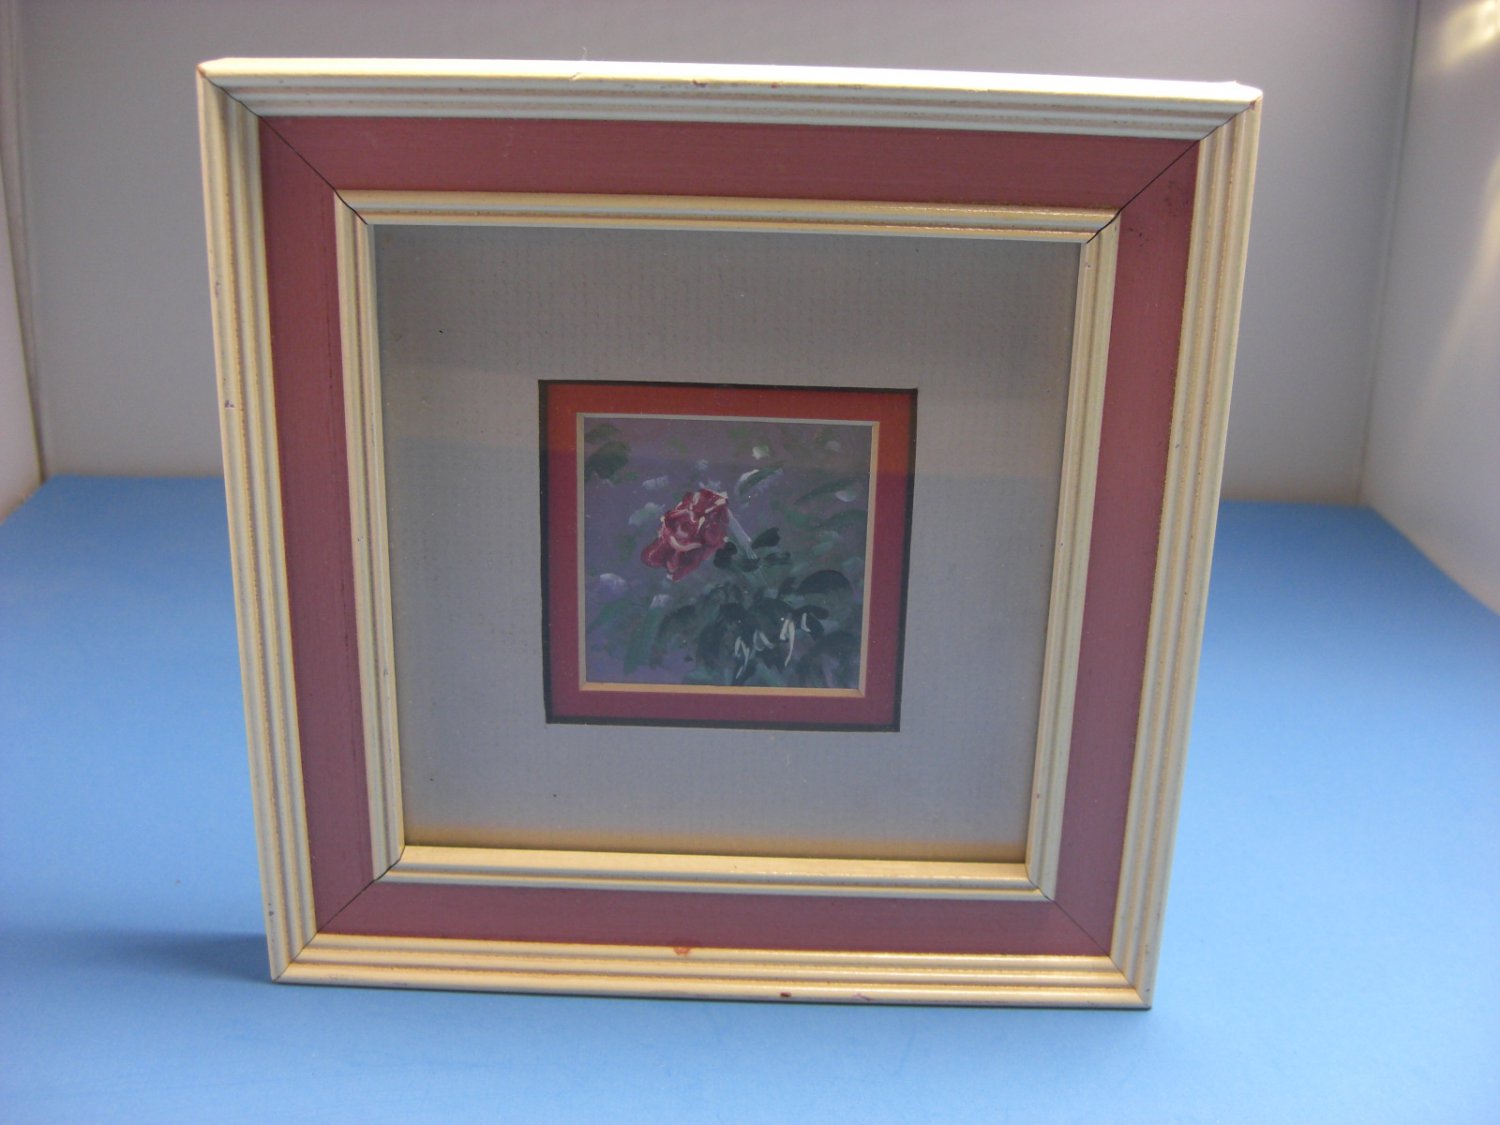 Miniature Signed Art by Gage Framed Matted Painting